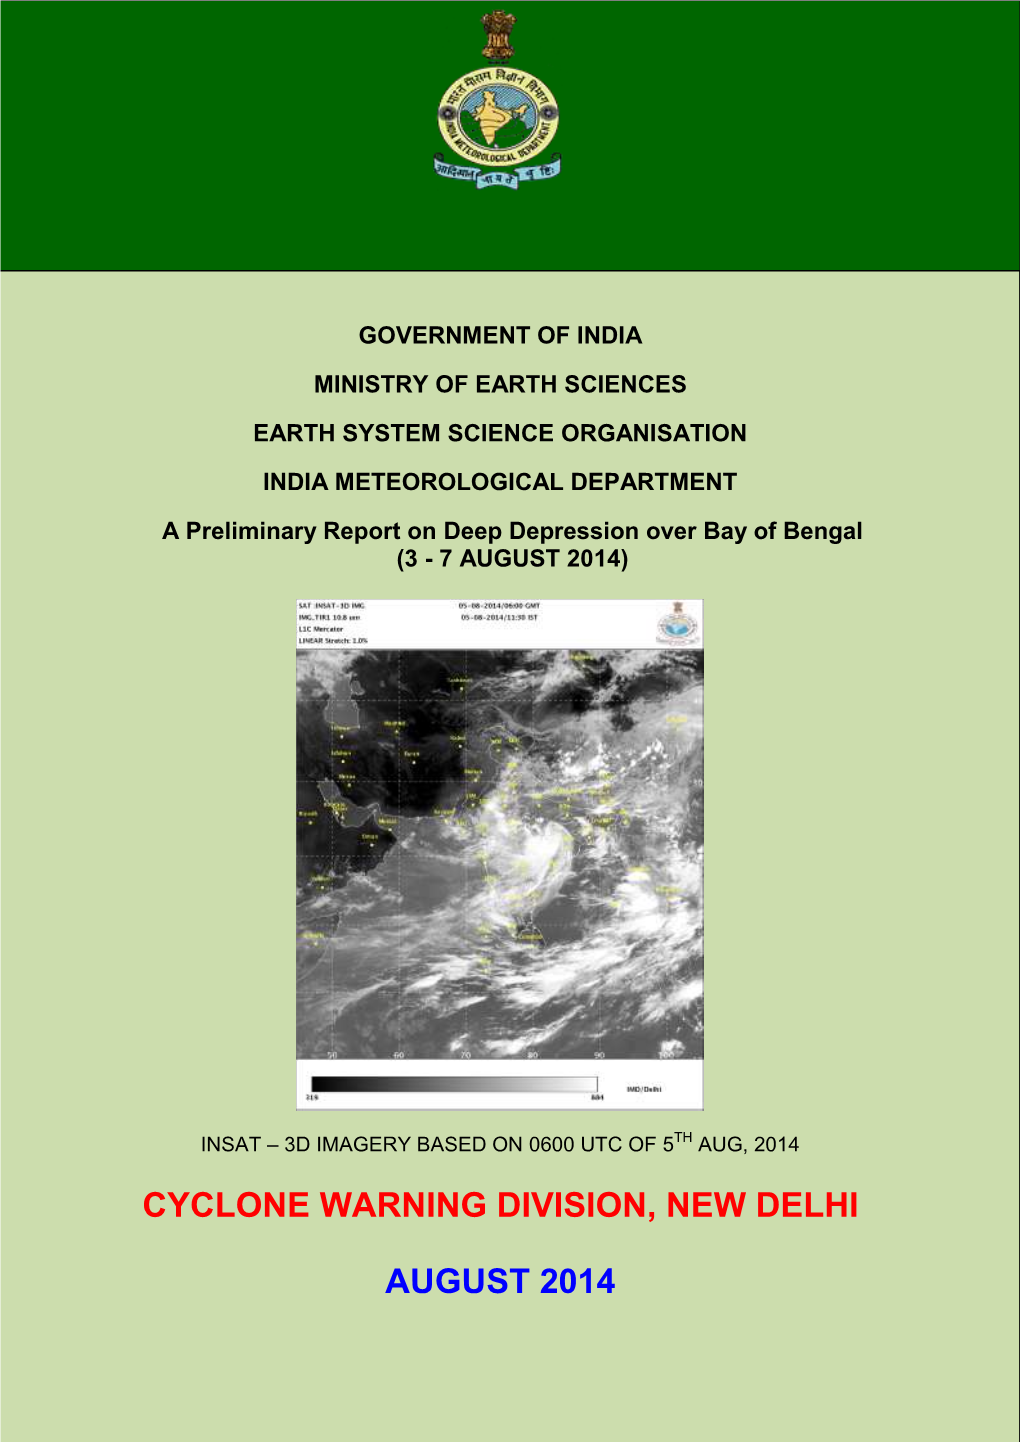 Cyclone Warning Division, New Delhi August 2014